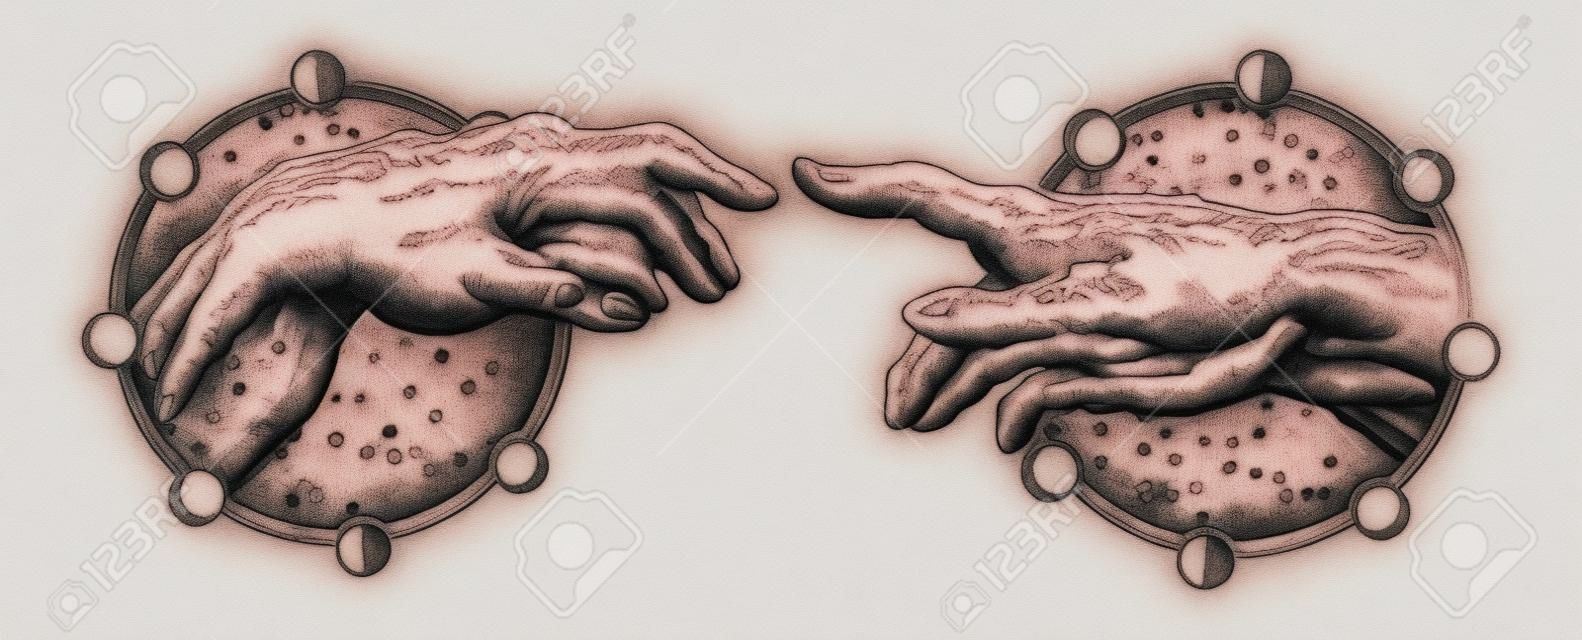 Michelangelo God's touch. Human hands touching with fingers tattoo and t-shirt design. Hands tattoo Renaissance. Gods and Adam, symbol of spirituality, religion, connection and interaction